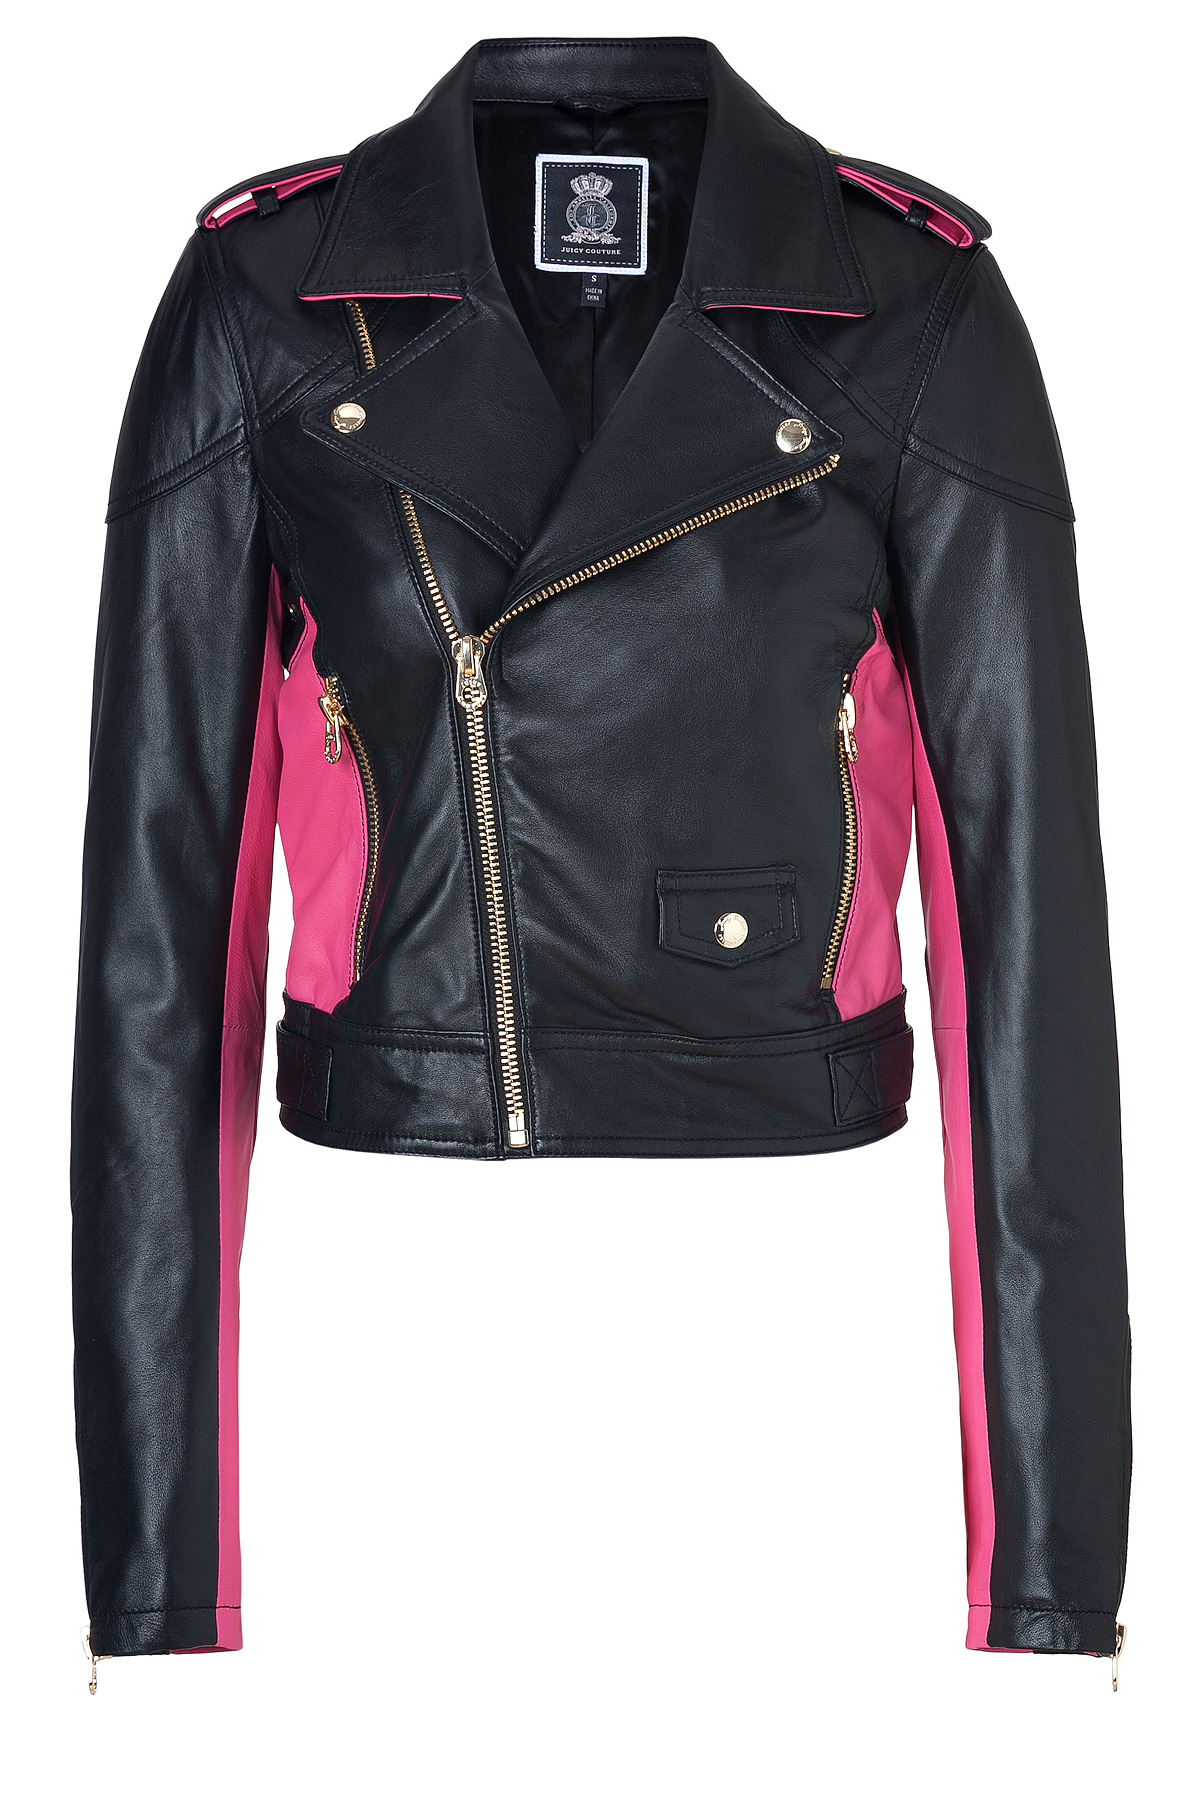 Lyst - Juicy Couture Pitch Blackmagenta Leather Moto Jacket in Black